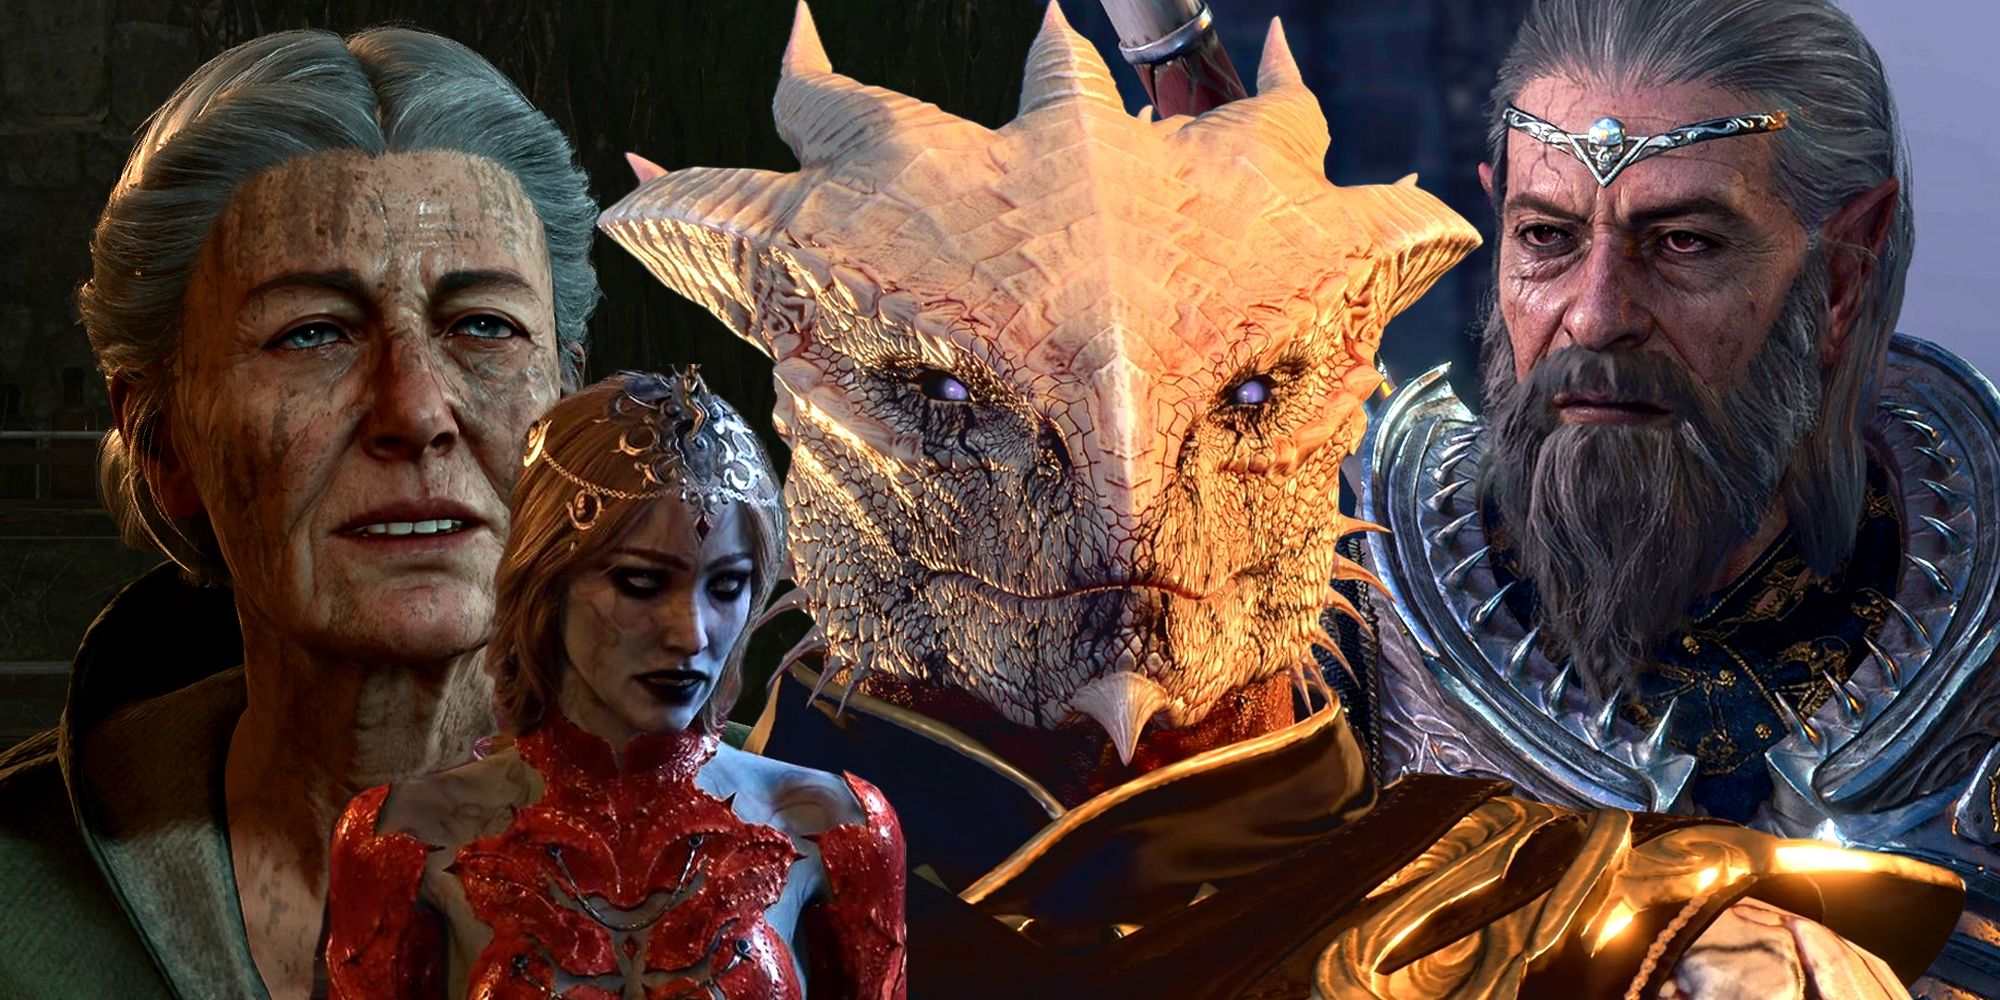 Auntie Ethel, Orin the Red, the Dark Urge, and Ketheric Thorm in Baldur's Gate 3.